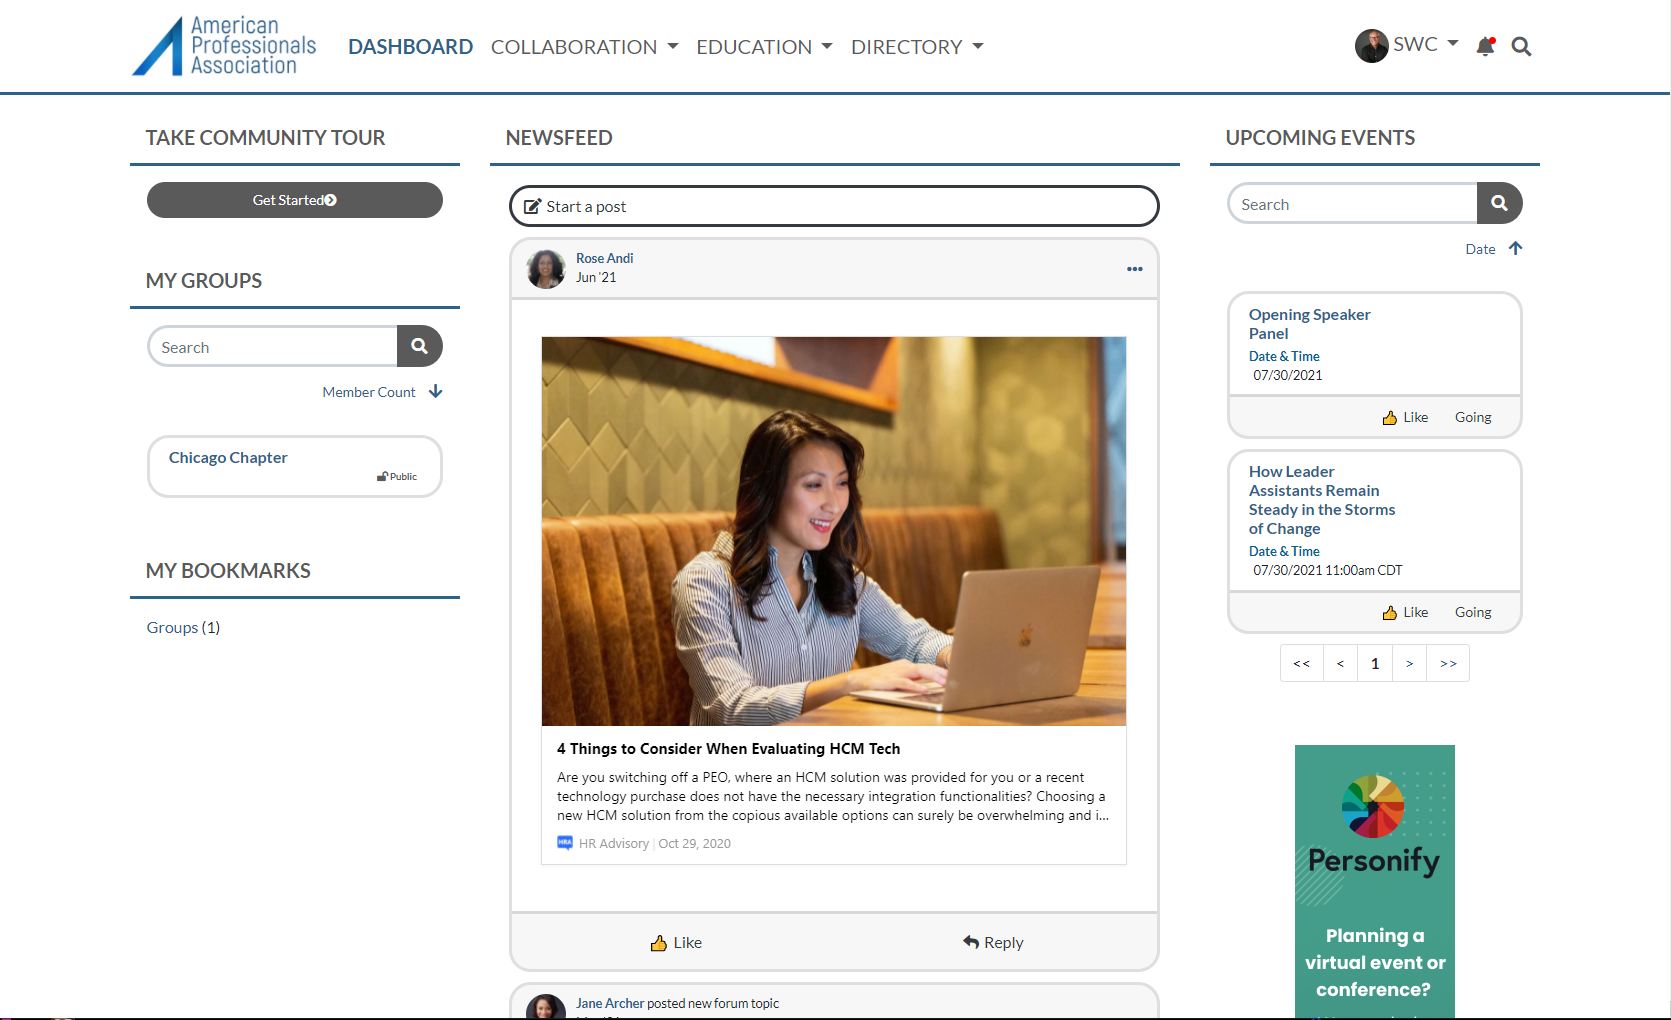 Online community landing page for the American Professionals Association, showing events and newsfeed. 